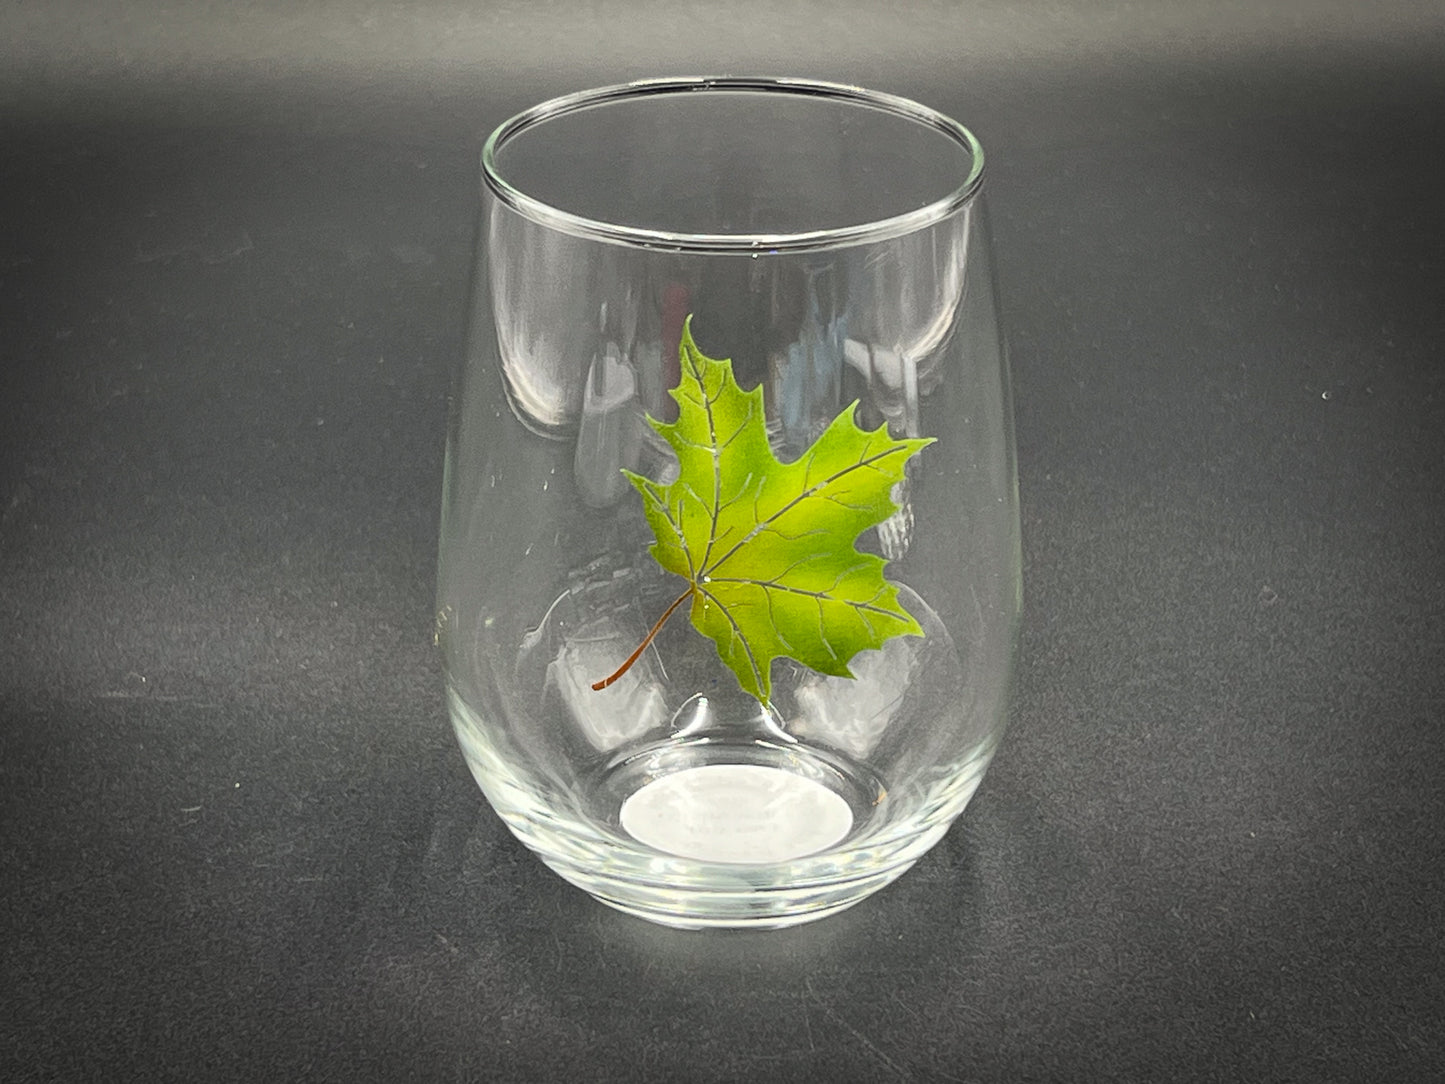 Summer Maple Leaf Engraved and Painted - 17 oz Stemless Wine Glass